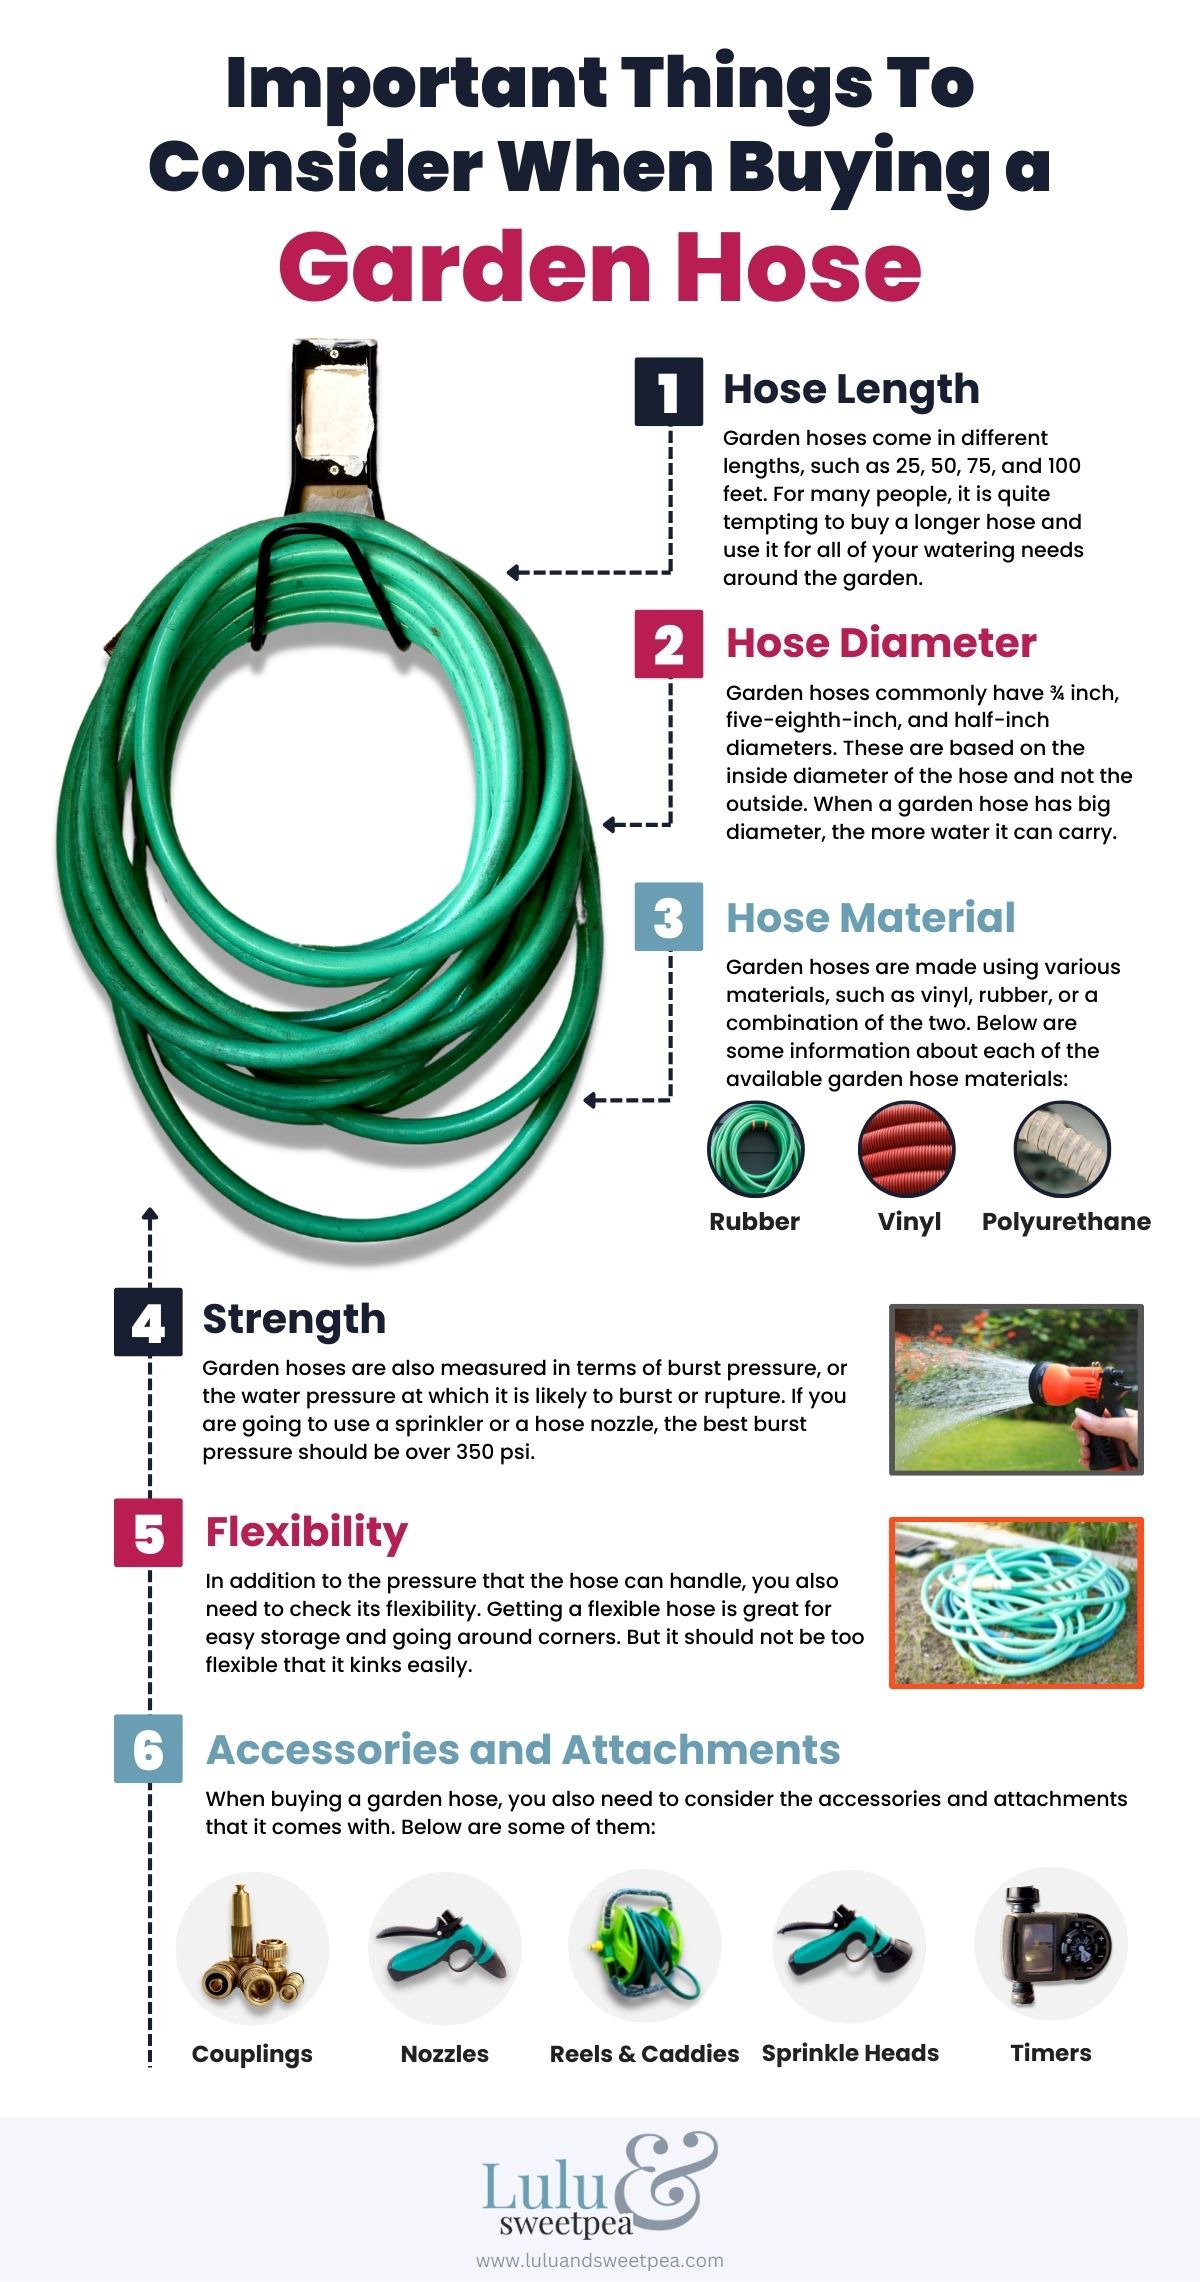 Things to Consider Before Buying Garden Hoses